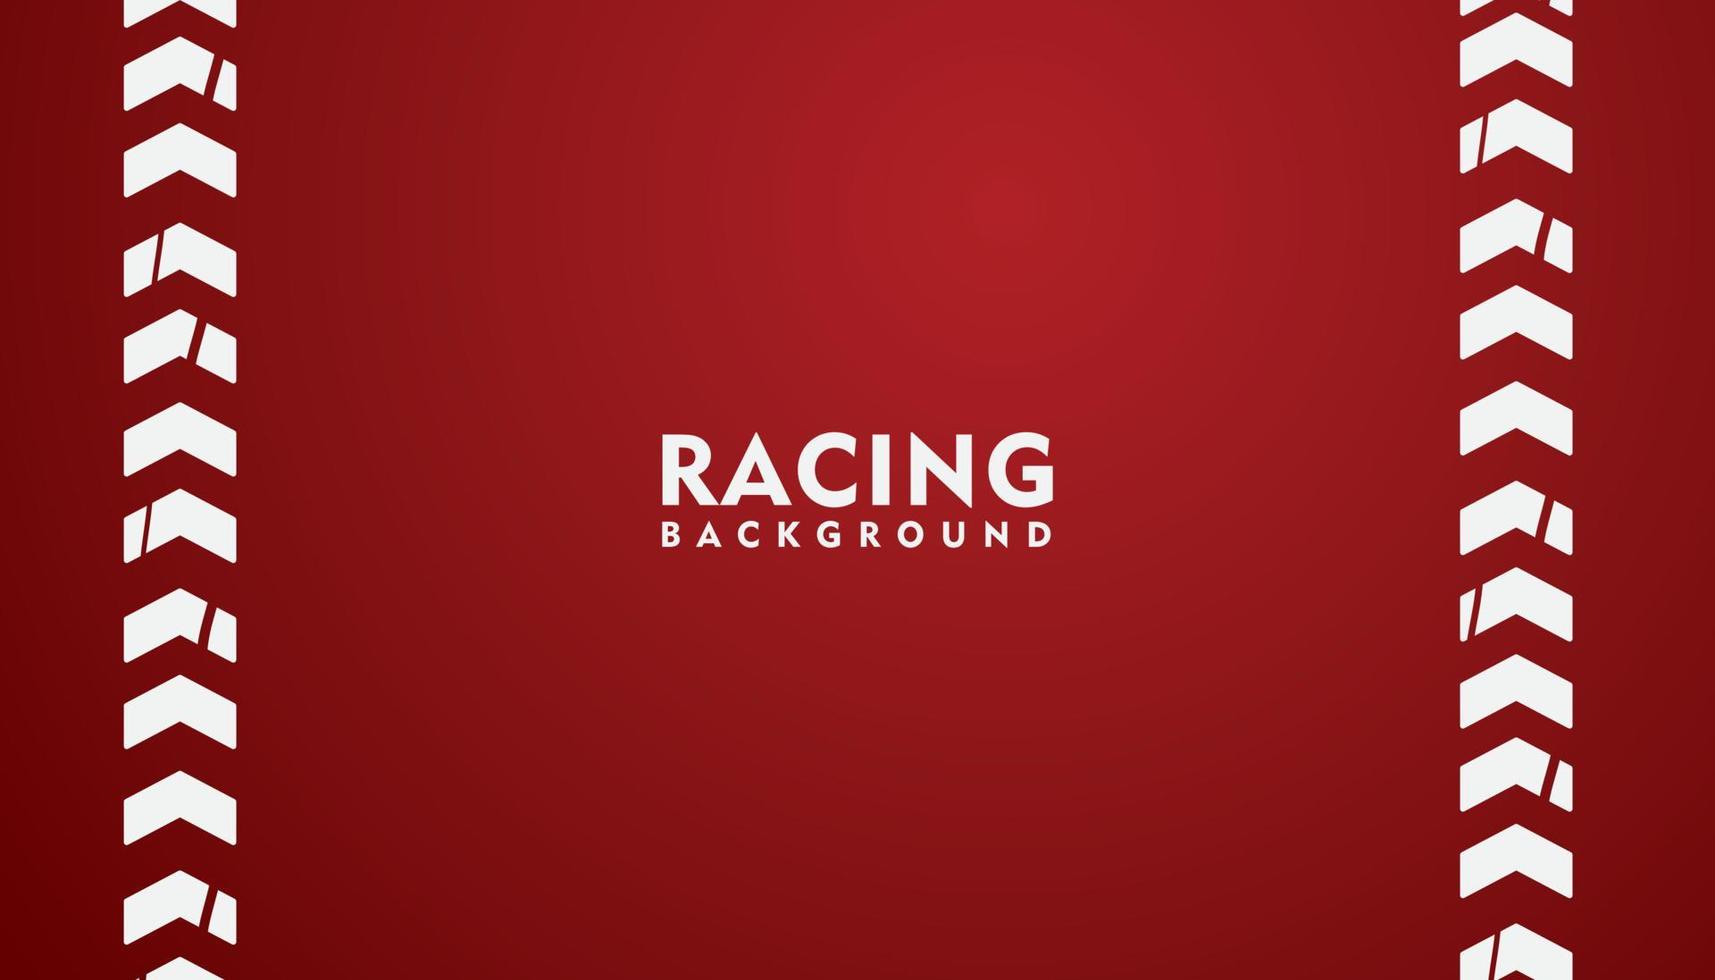 Racing Background Designs. Racing Square Background Vector